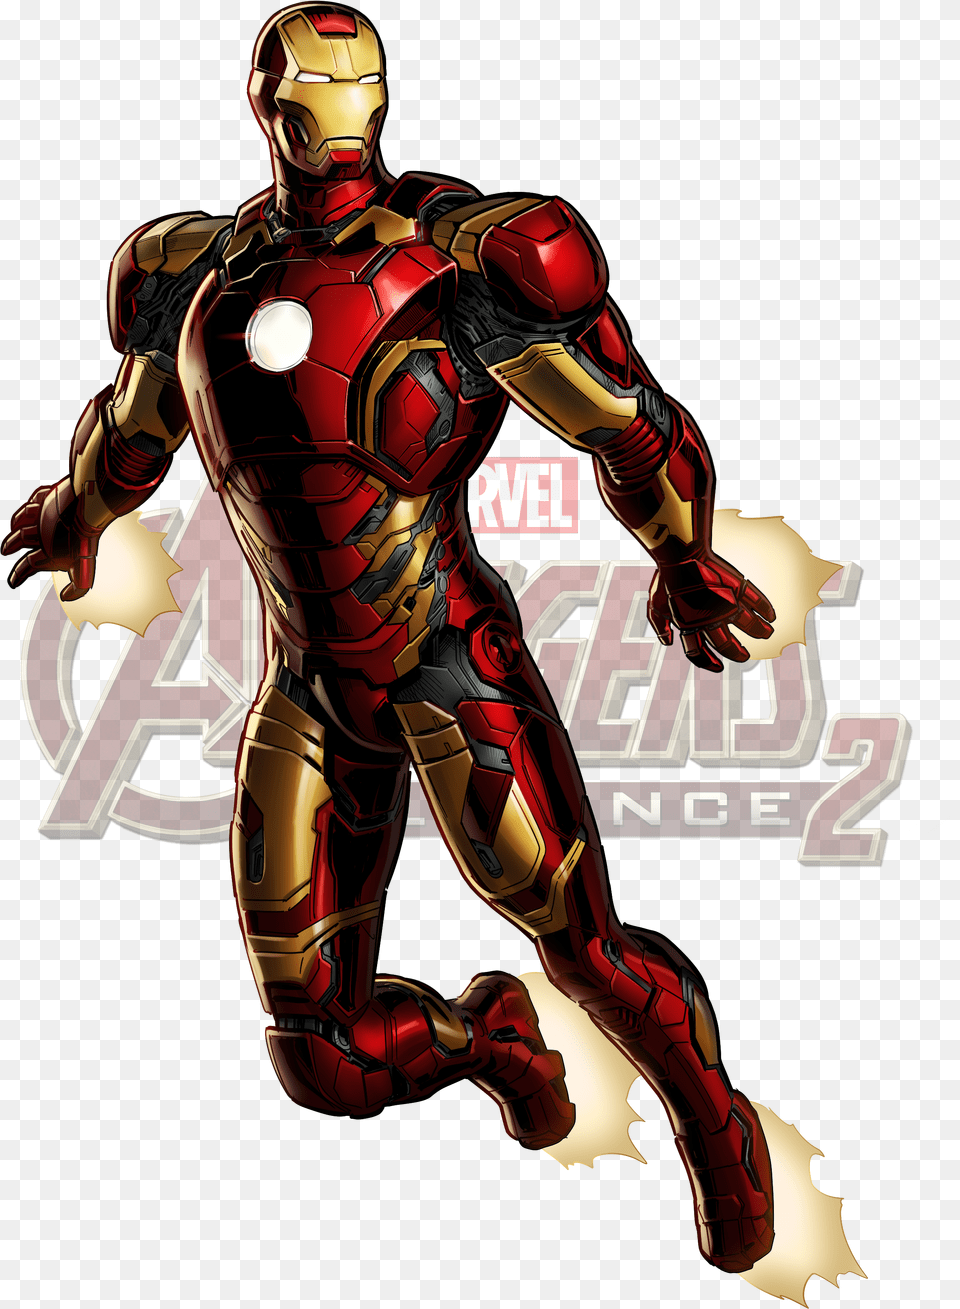 Avengers Alliance 2 Wikia Iron Man Flying, Adult, Male, Person, Helmet Png